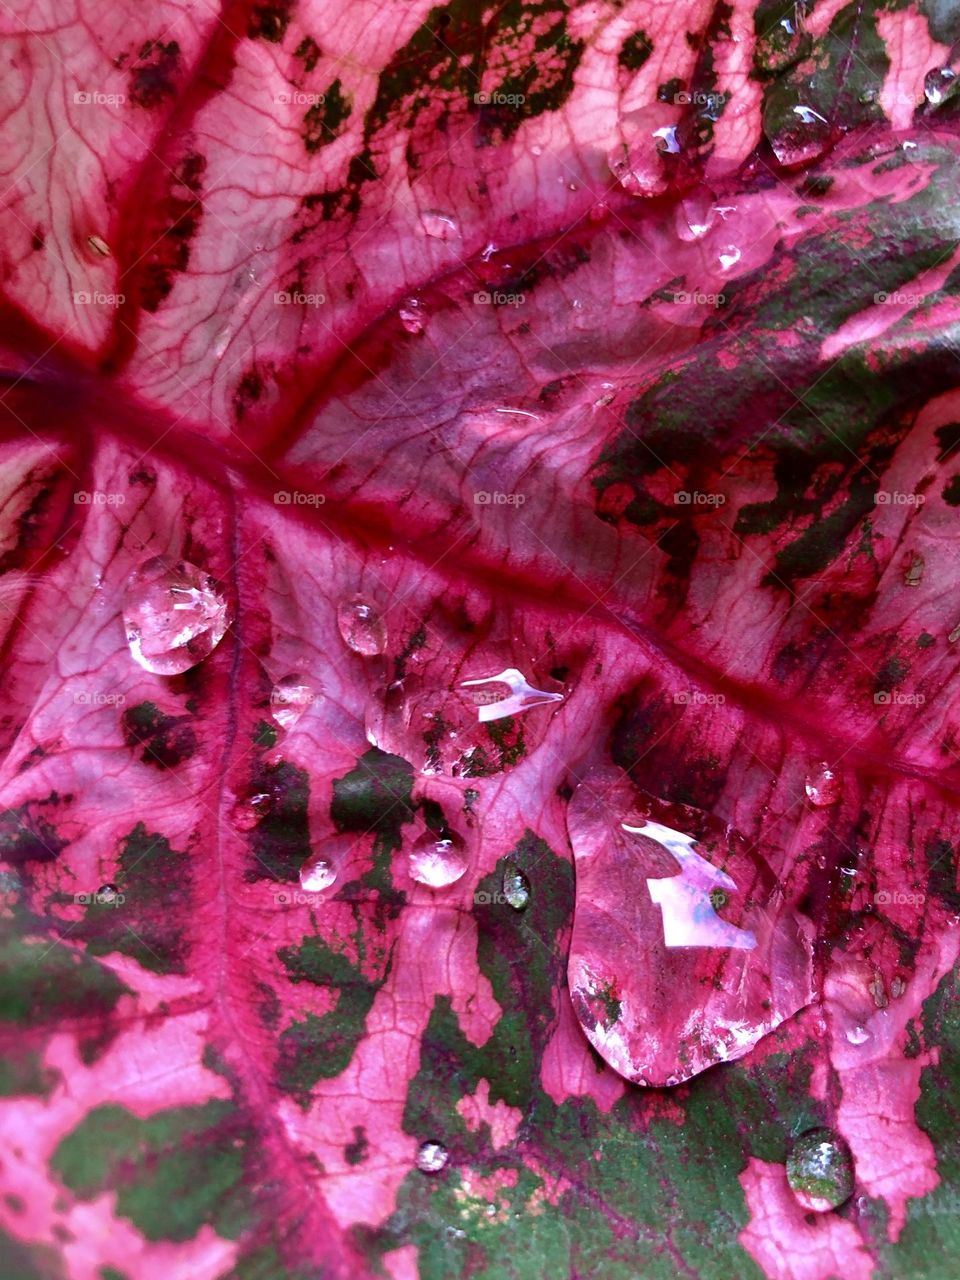 Full frame closeup of coleus leaf with raindrops. Pink is the primary color.